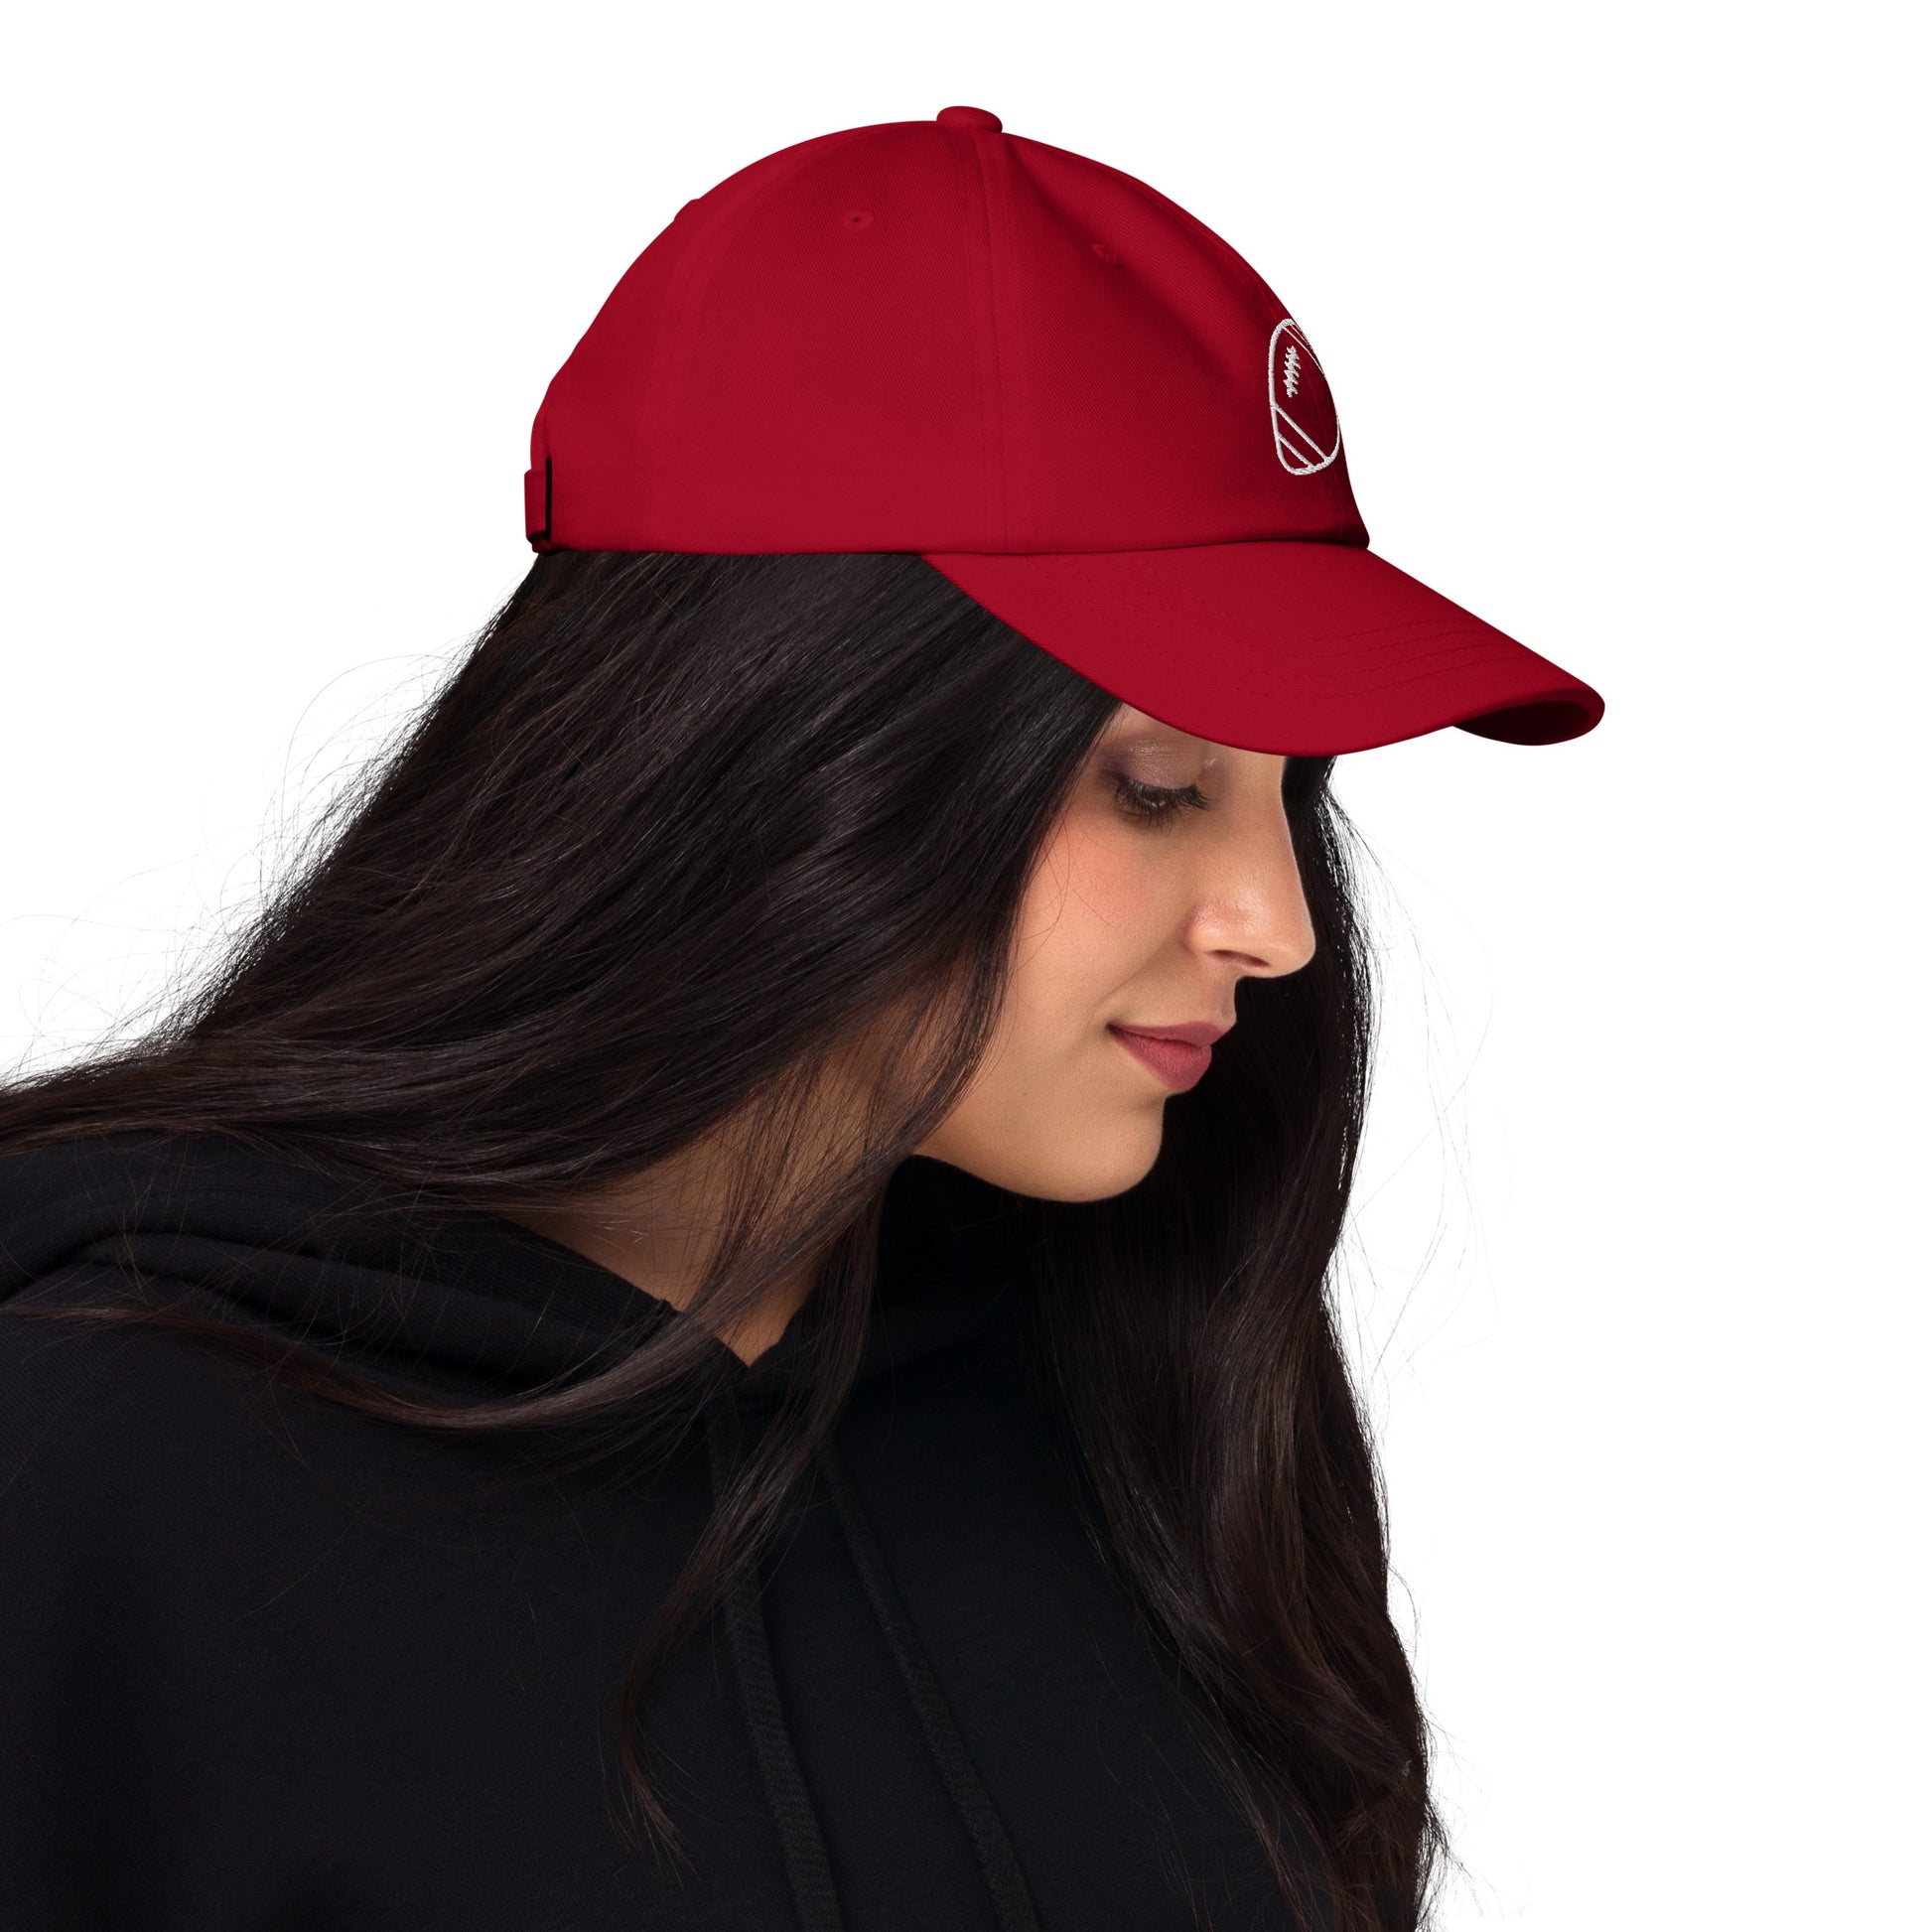 women with red baseball cap with football